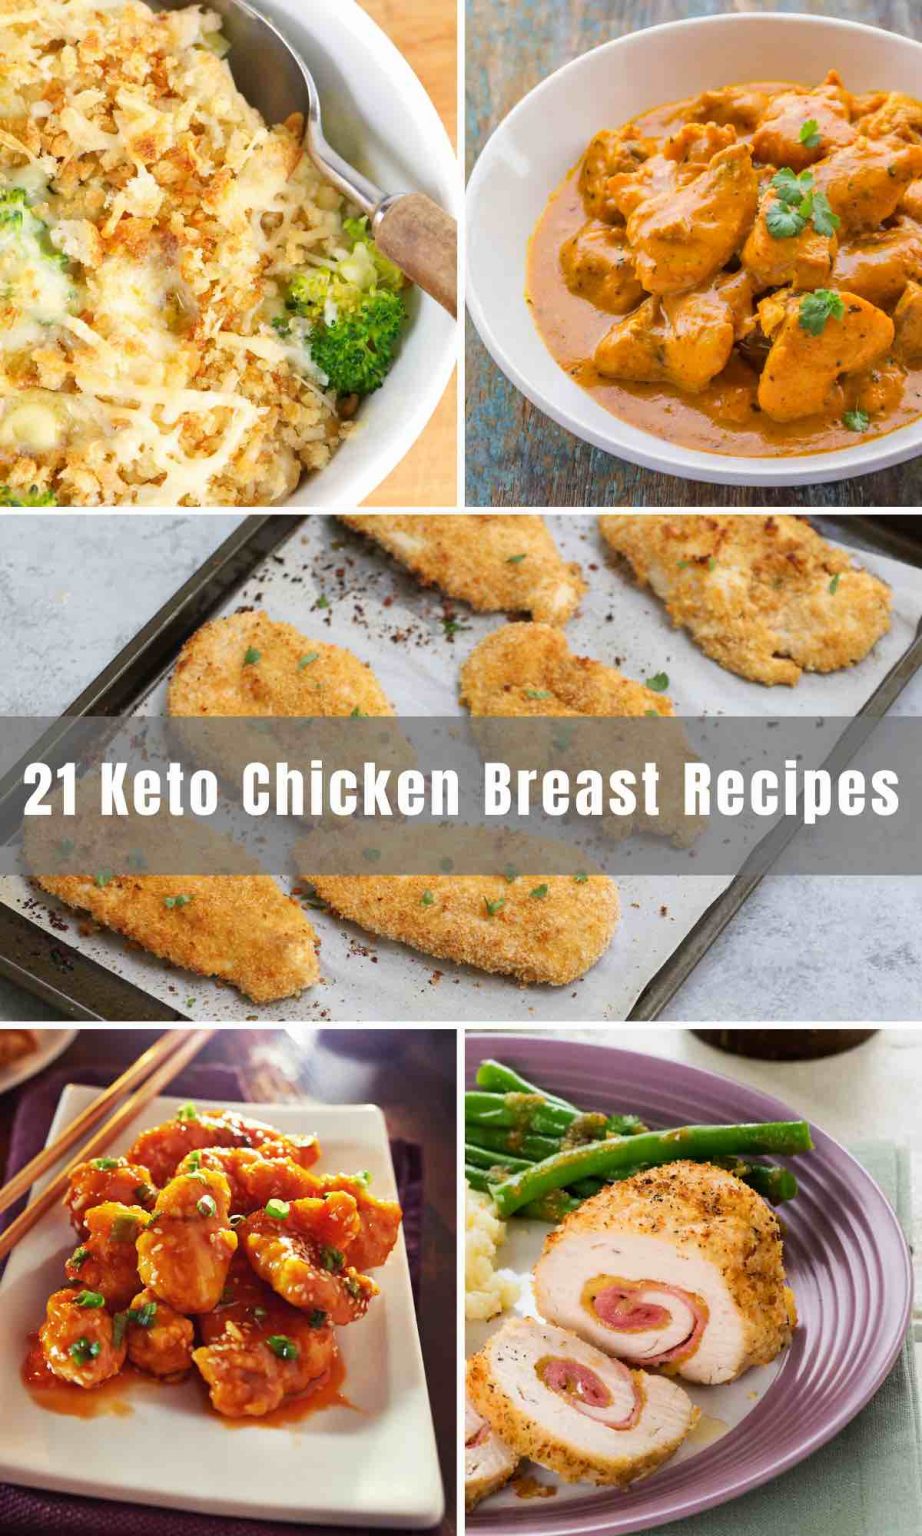 21 Easy Low Carb Keto Chicken Breast Recipes - IzzyCooking